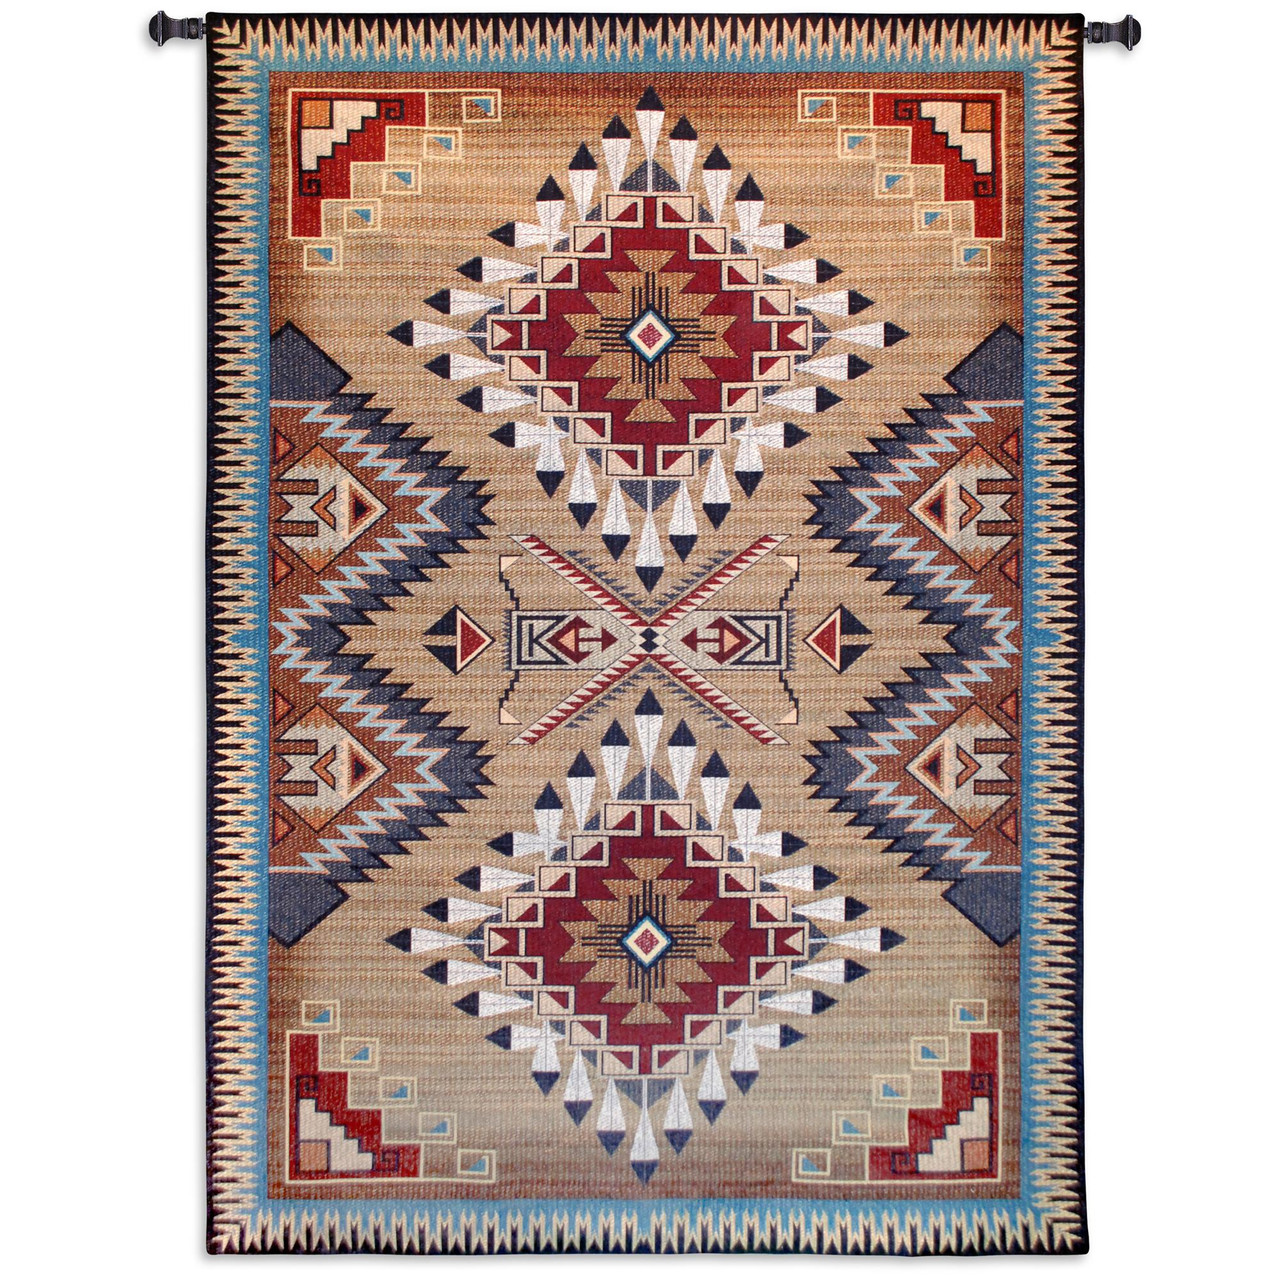 Brazos Tapestry Woven Tapestry Wall Art Hanging Rustic Native American  Inspired Geometric Design 100% Cotton USA Size 76x53